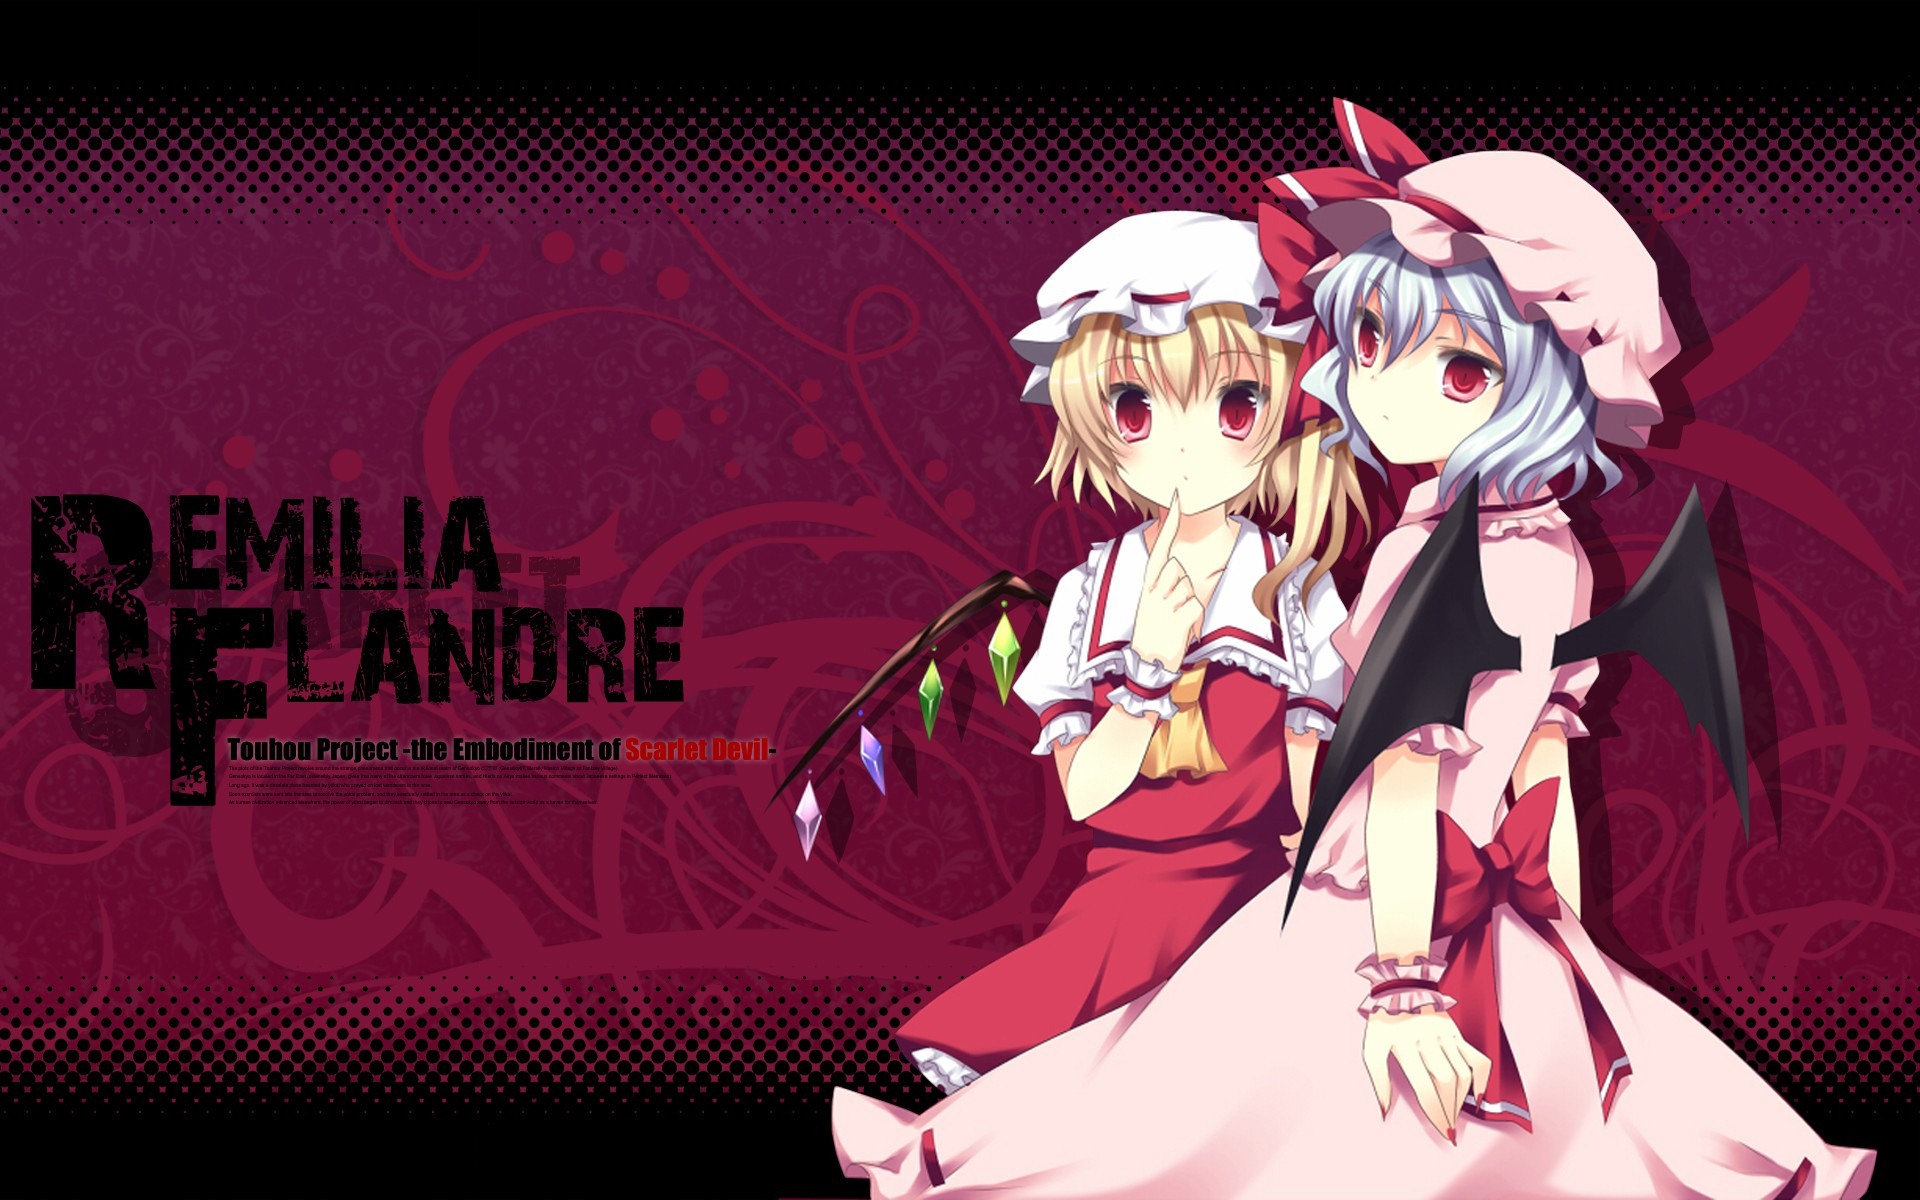 Touhou Project caricature HD wallpapers #8 - 1920x1200